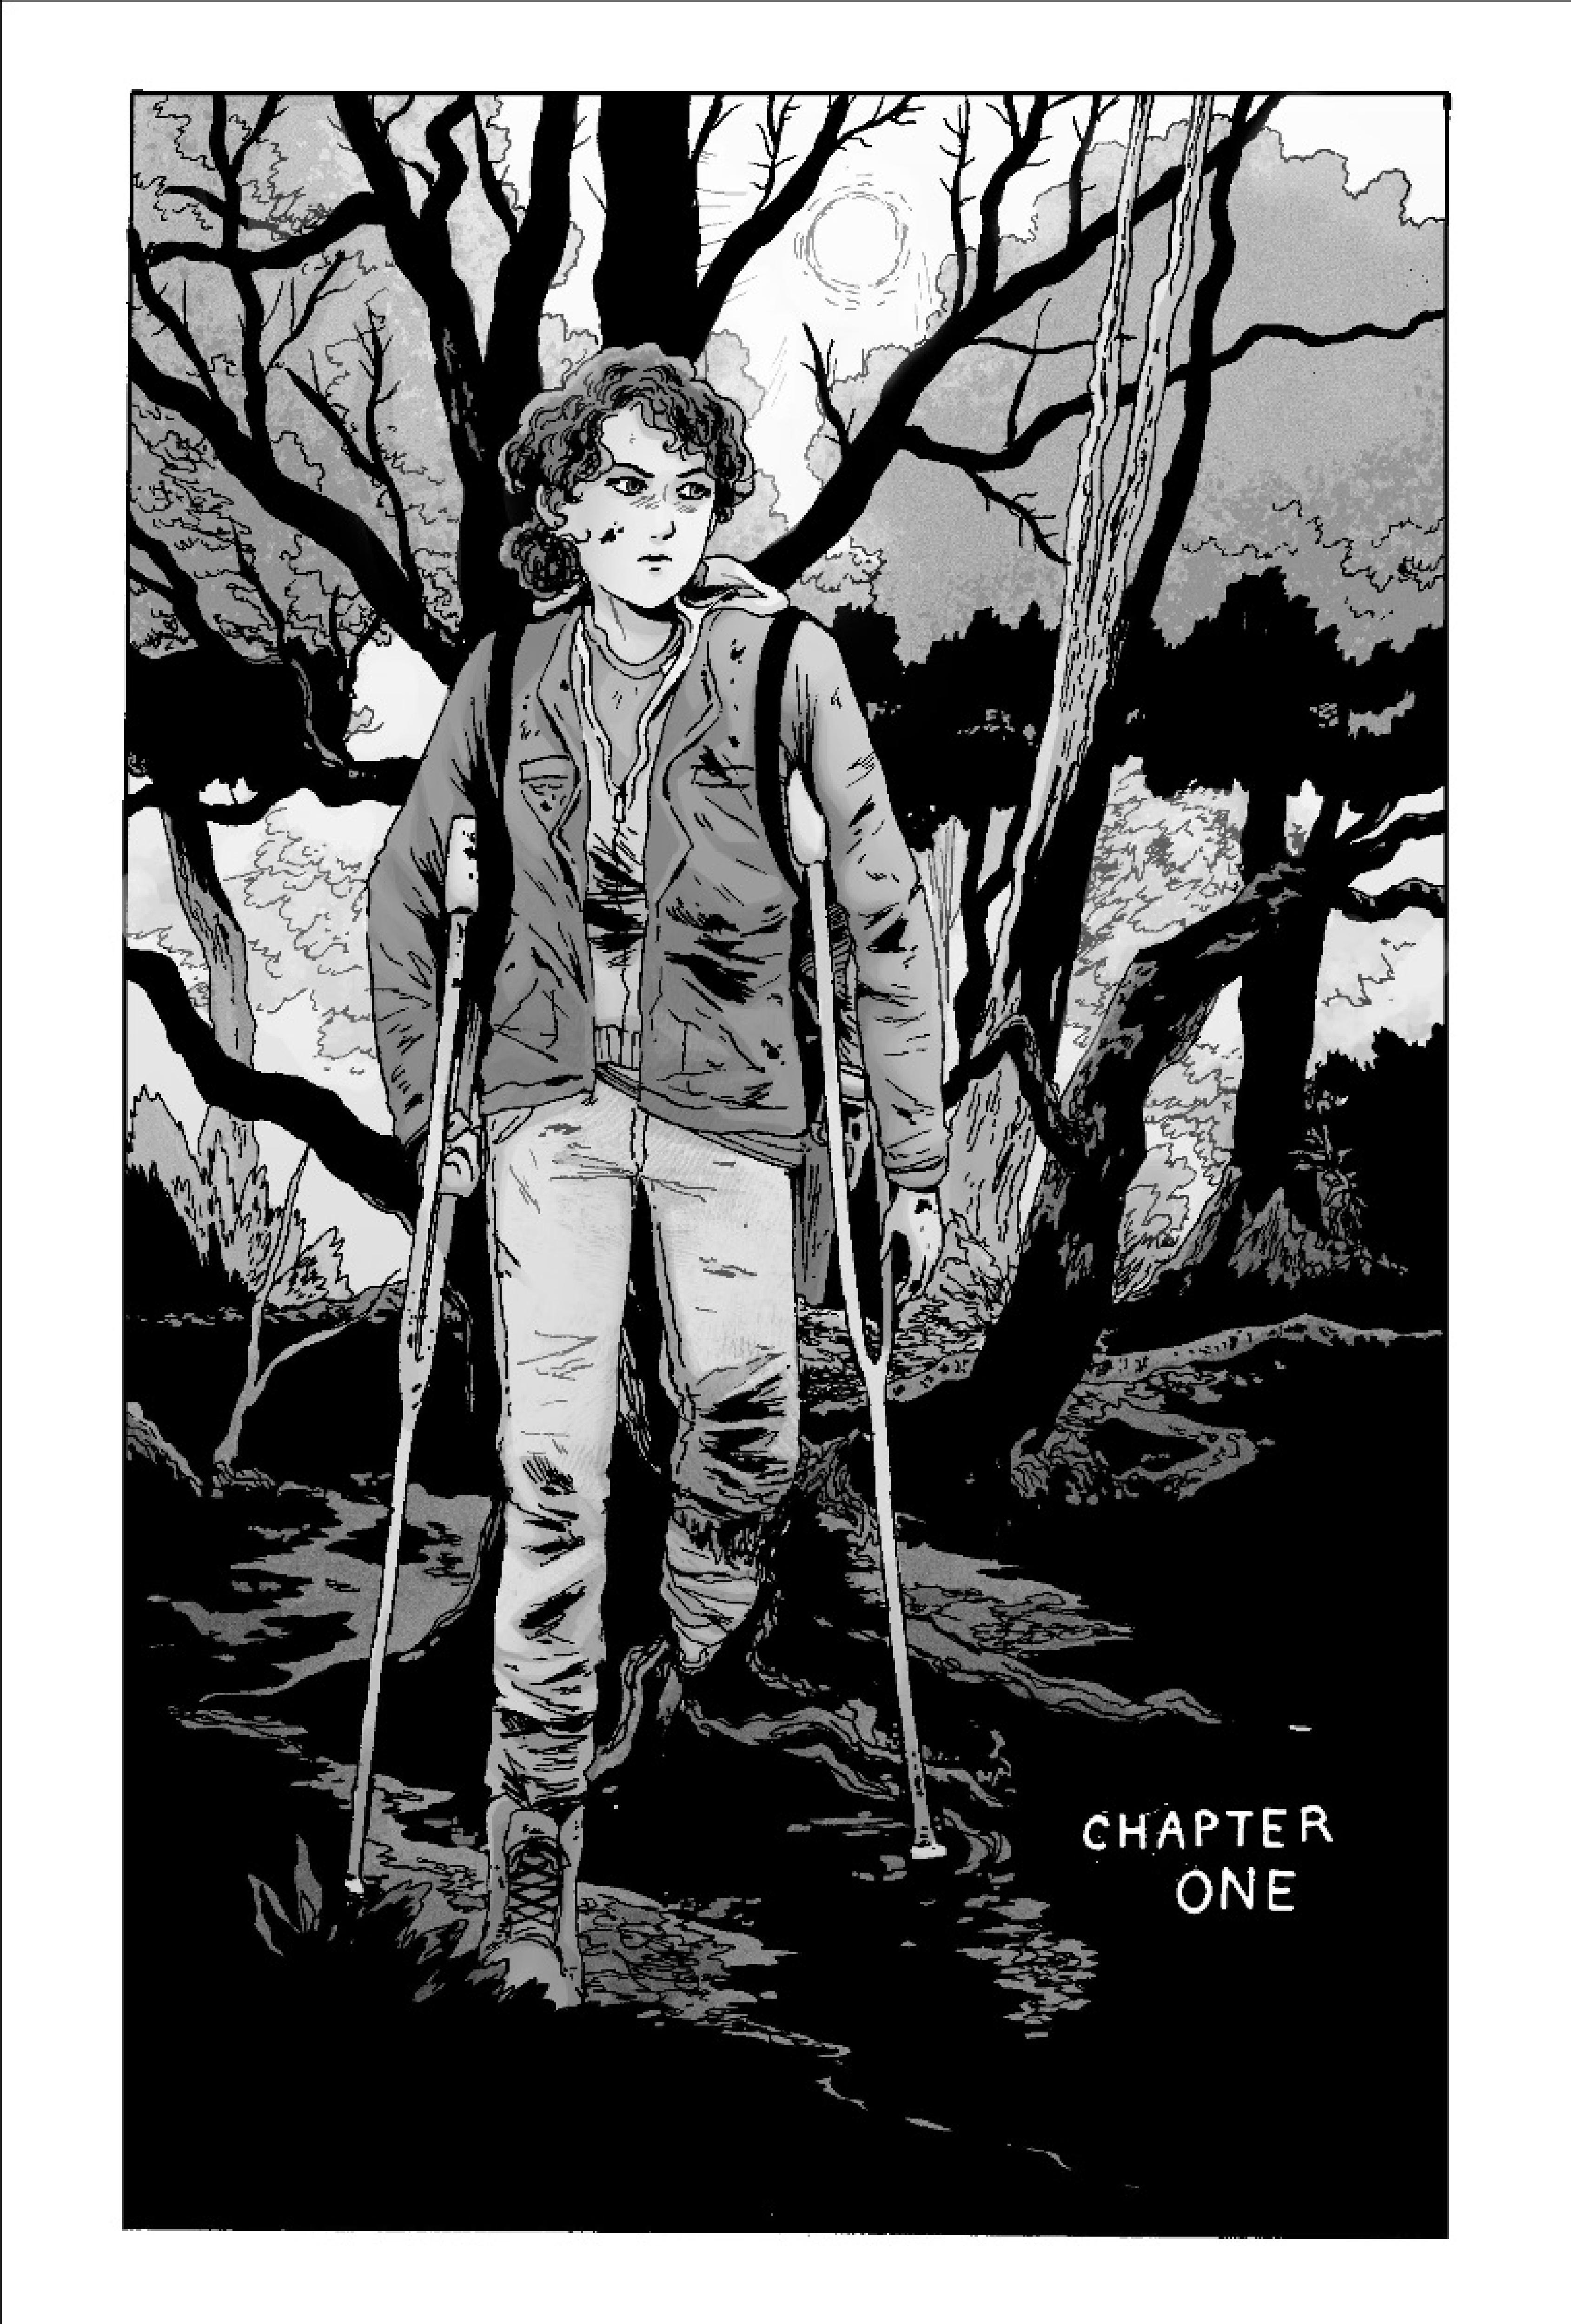 Clementine Graphic Novel Book 1